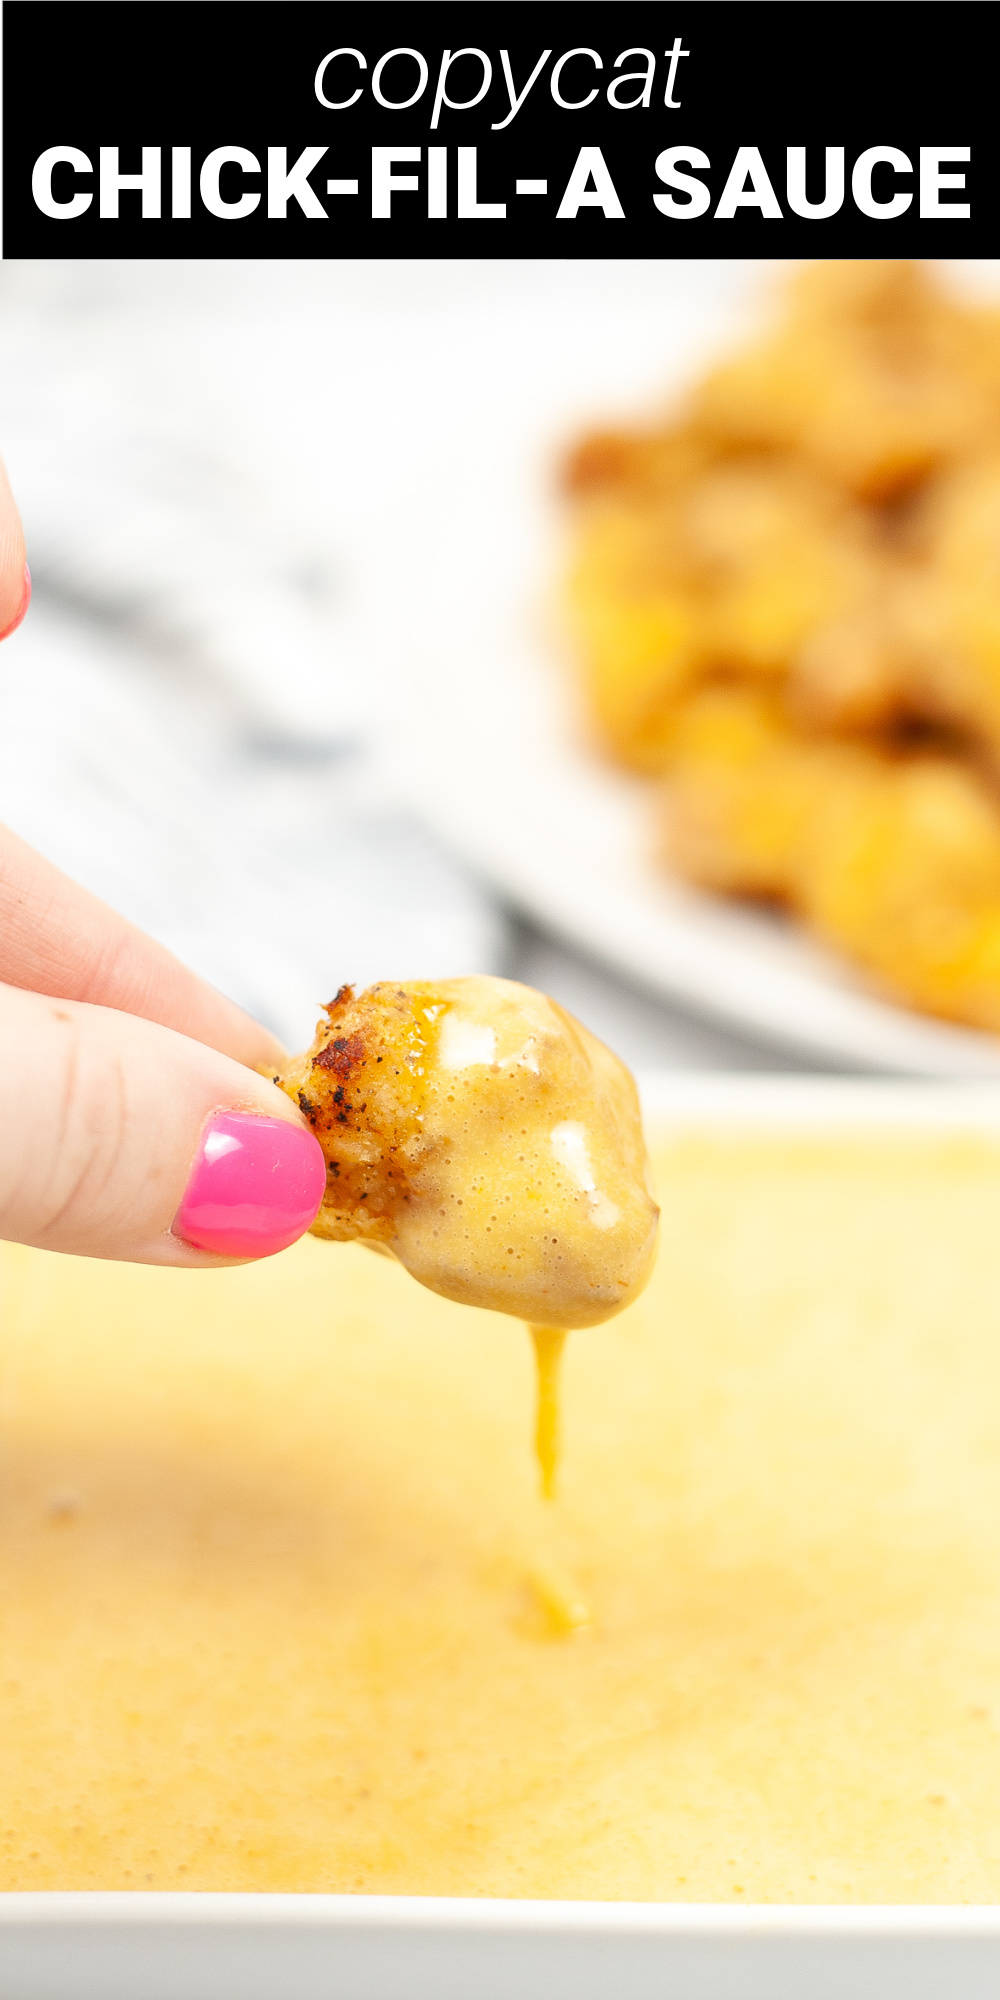 This copycat Chick-fil-a Sauce recipe is the perfect cross between a honey mustard sauce and BBQ sauce but tastes even better than the original! Made with basic ingredients, this addictive dipping sauce is packed with that amazing signature flavor your whole family is going to love.